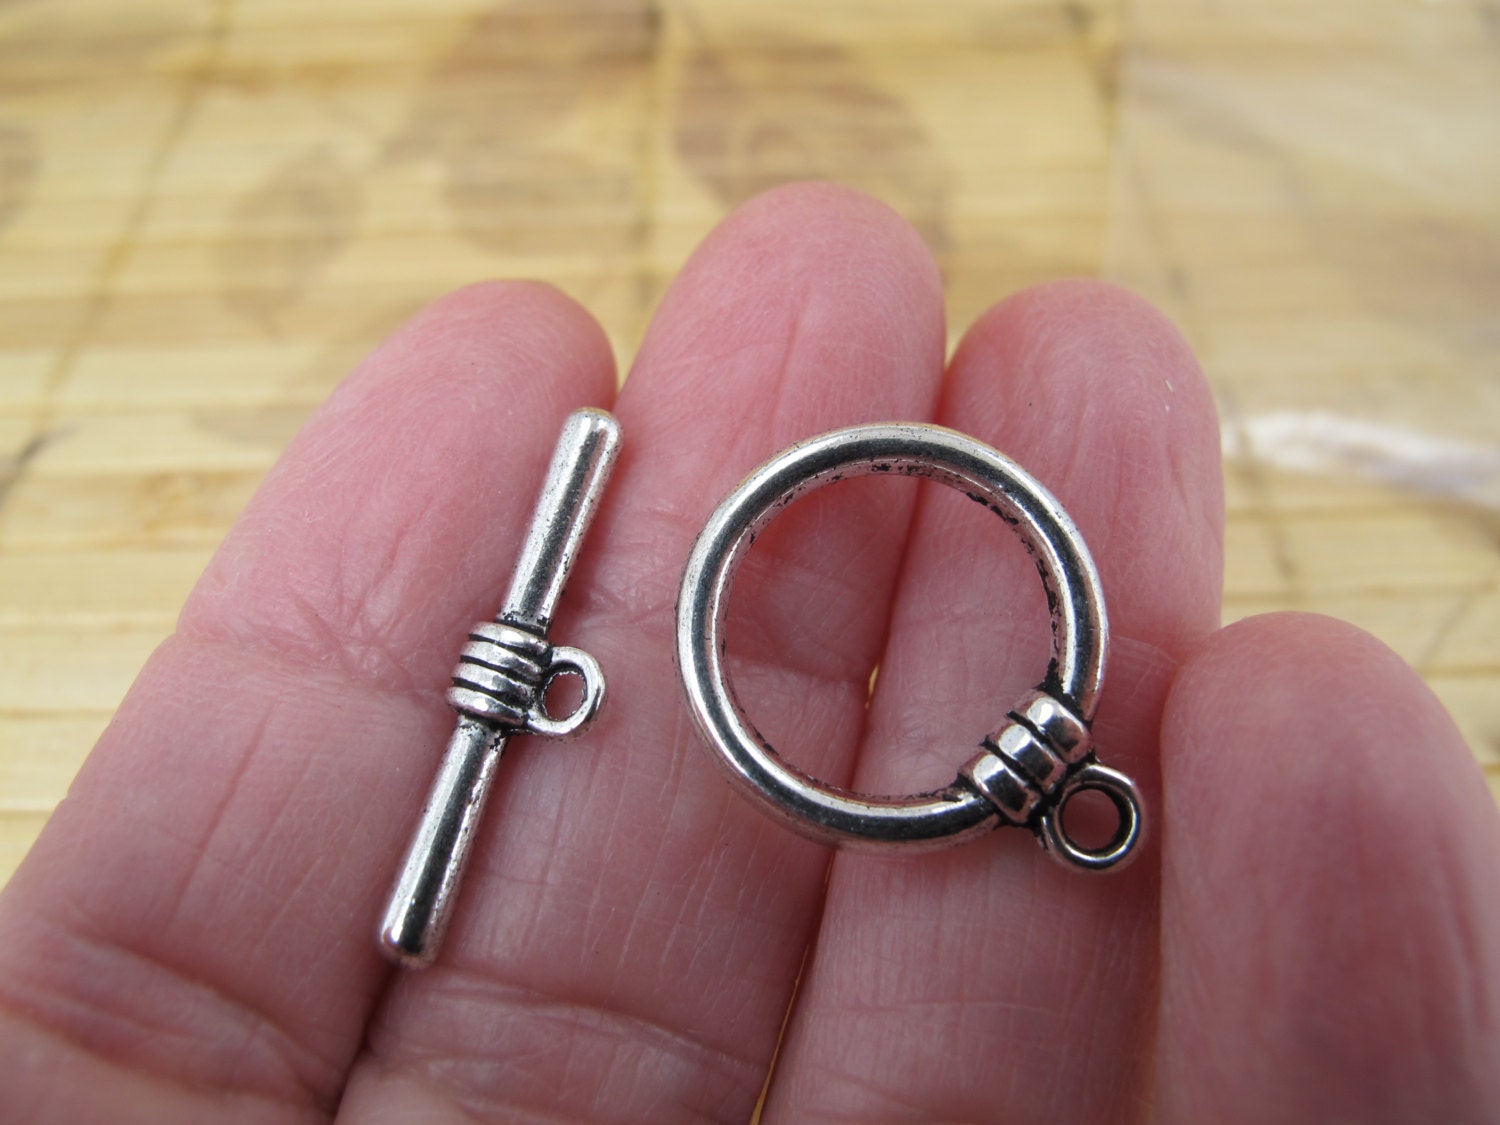 F1653 Beads4crafts Antique Silver Plated Toggle Clasps 15mm Pack of 3 